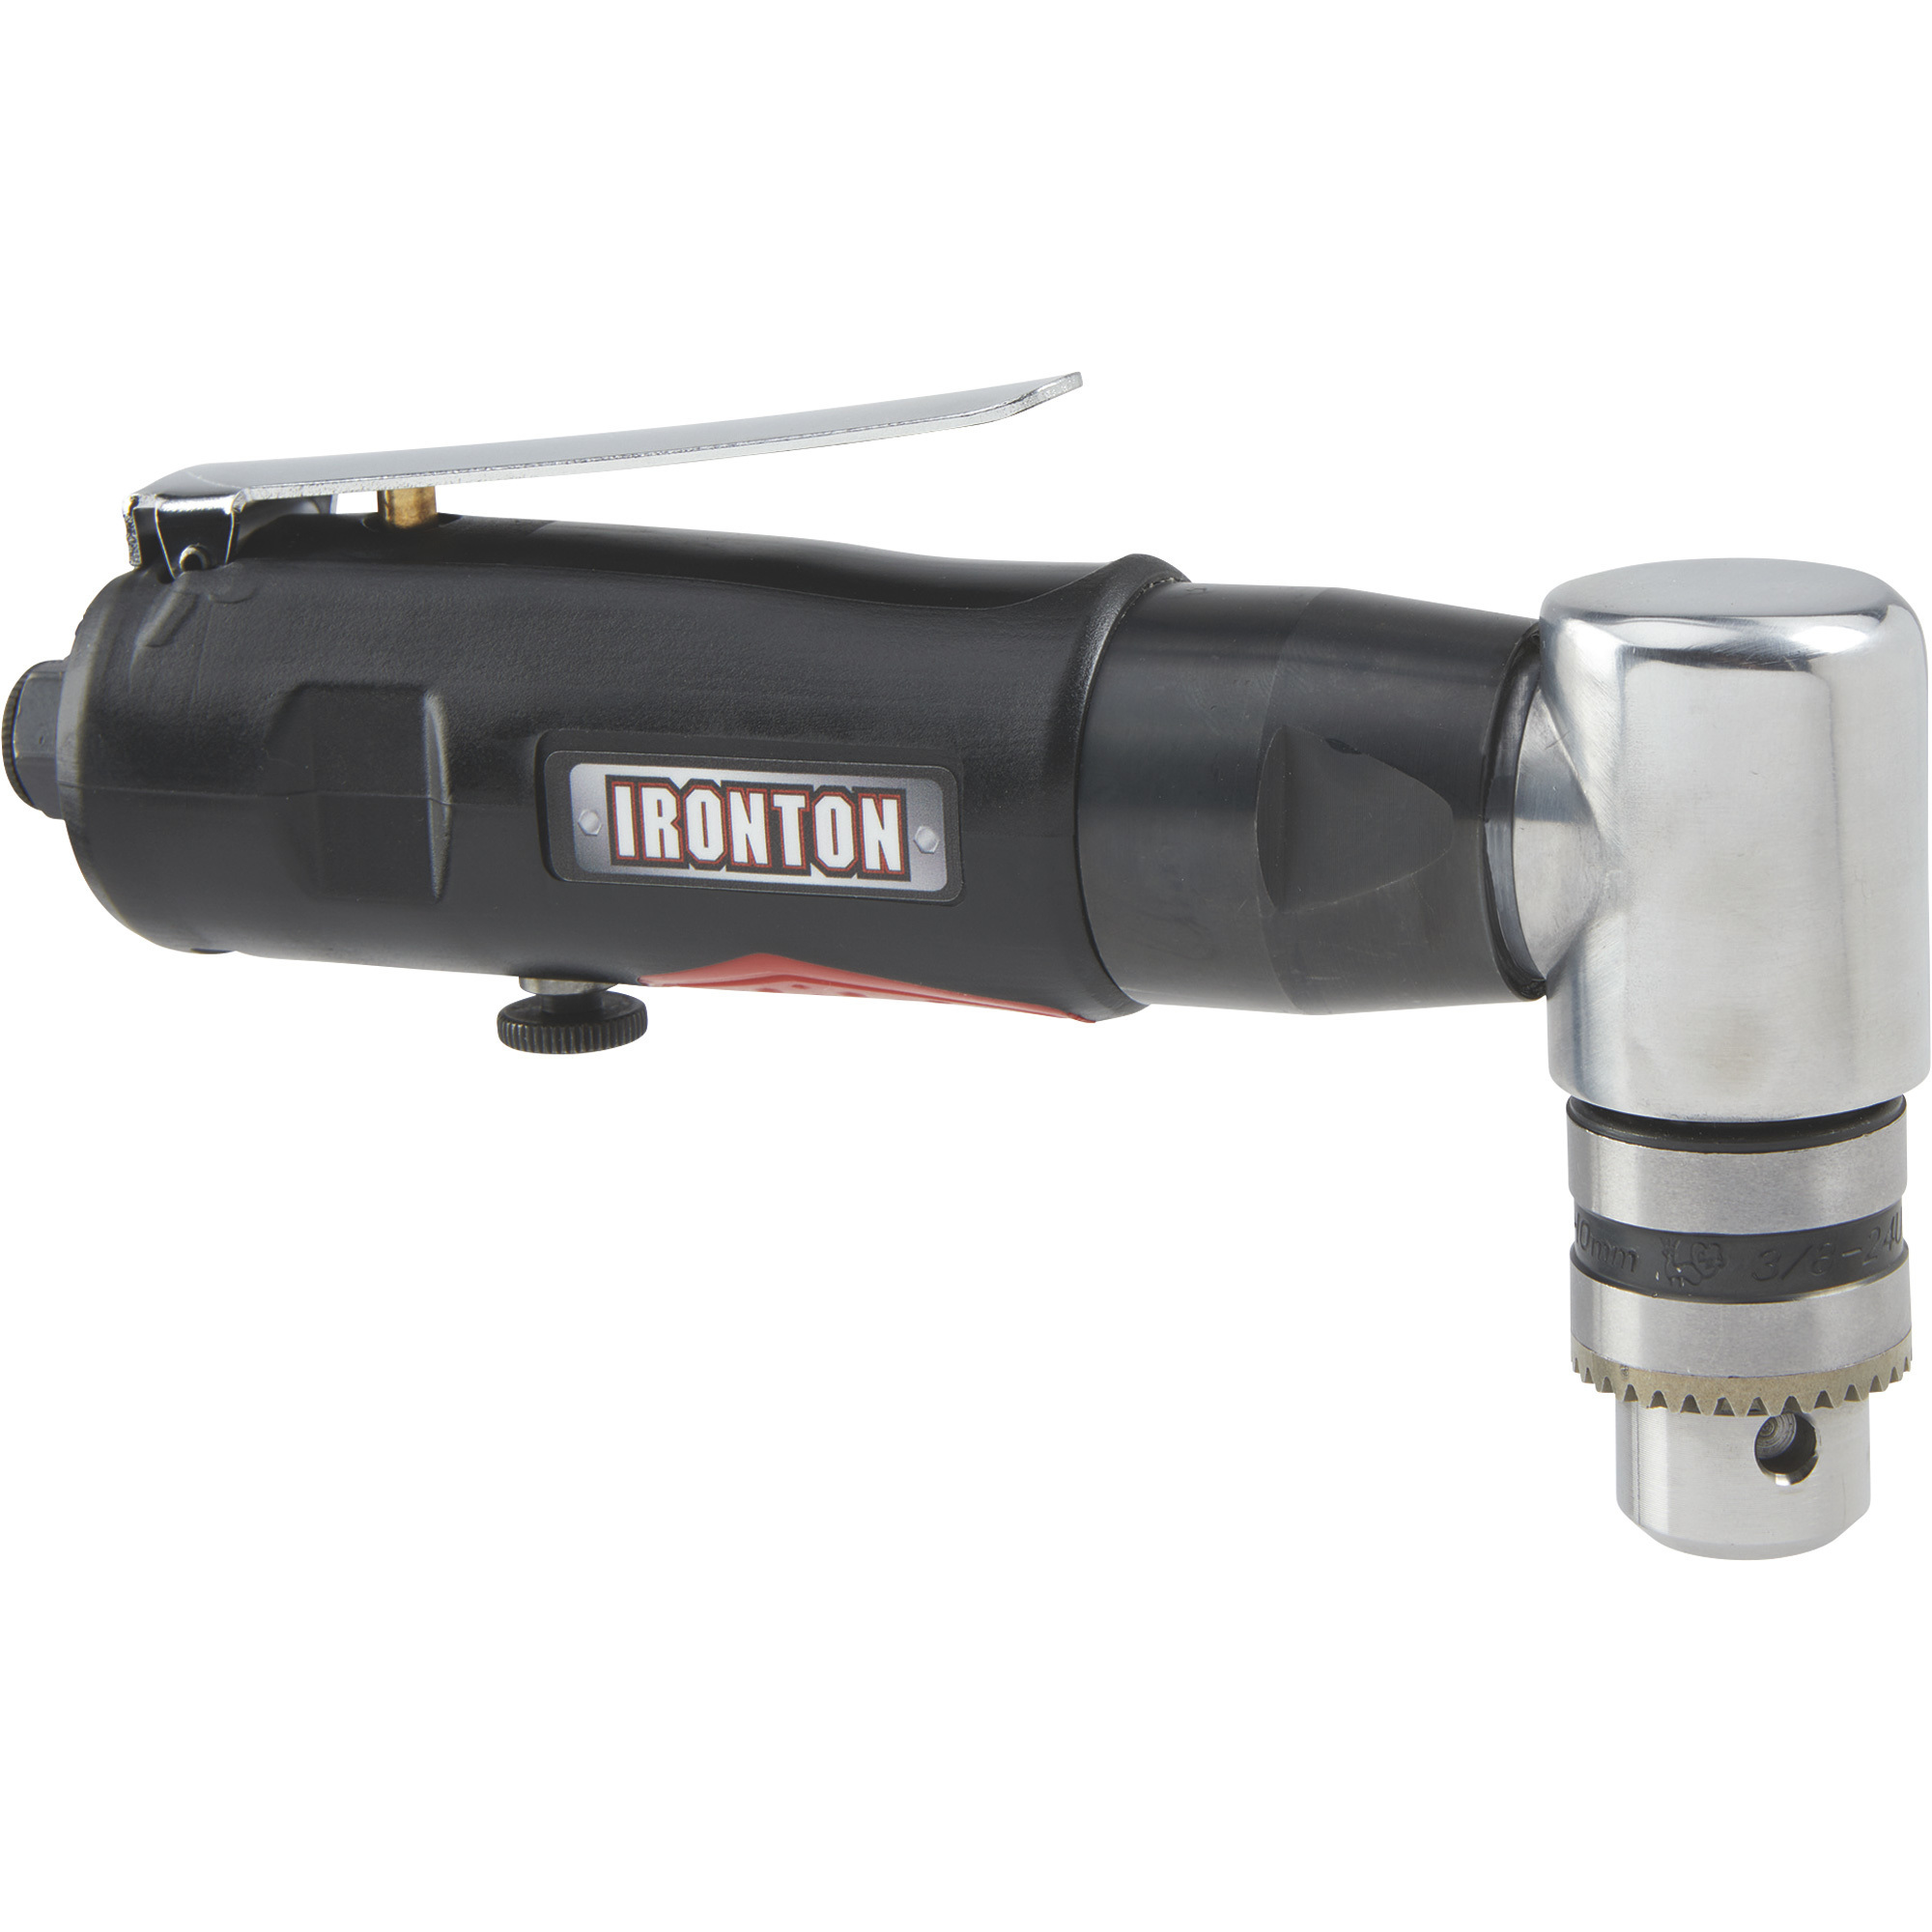 Ironton 3/8Inch Angle Air Drill, Reversible, 1400 RPM